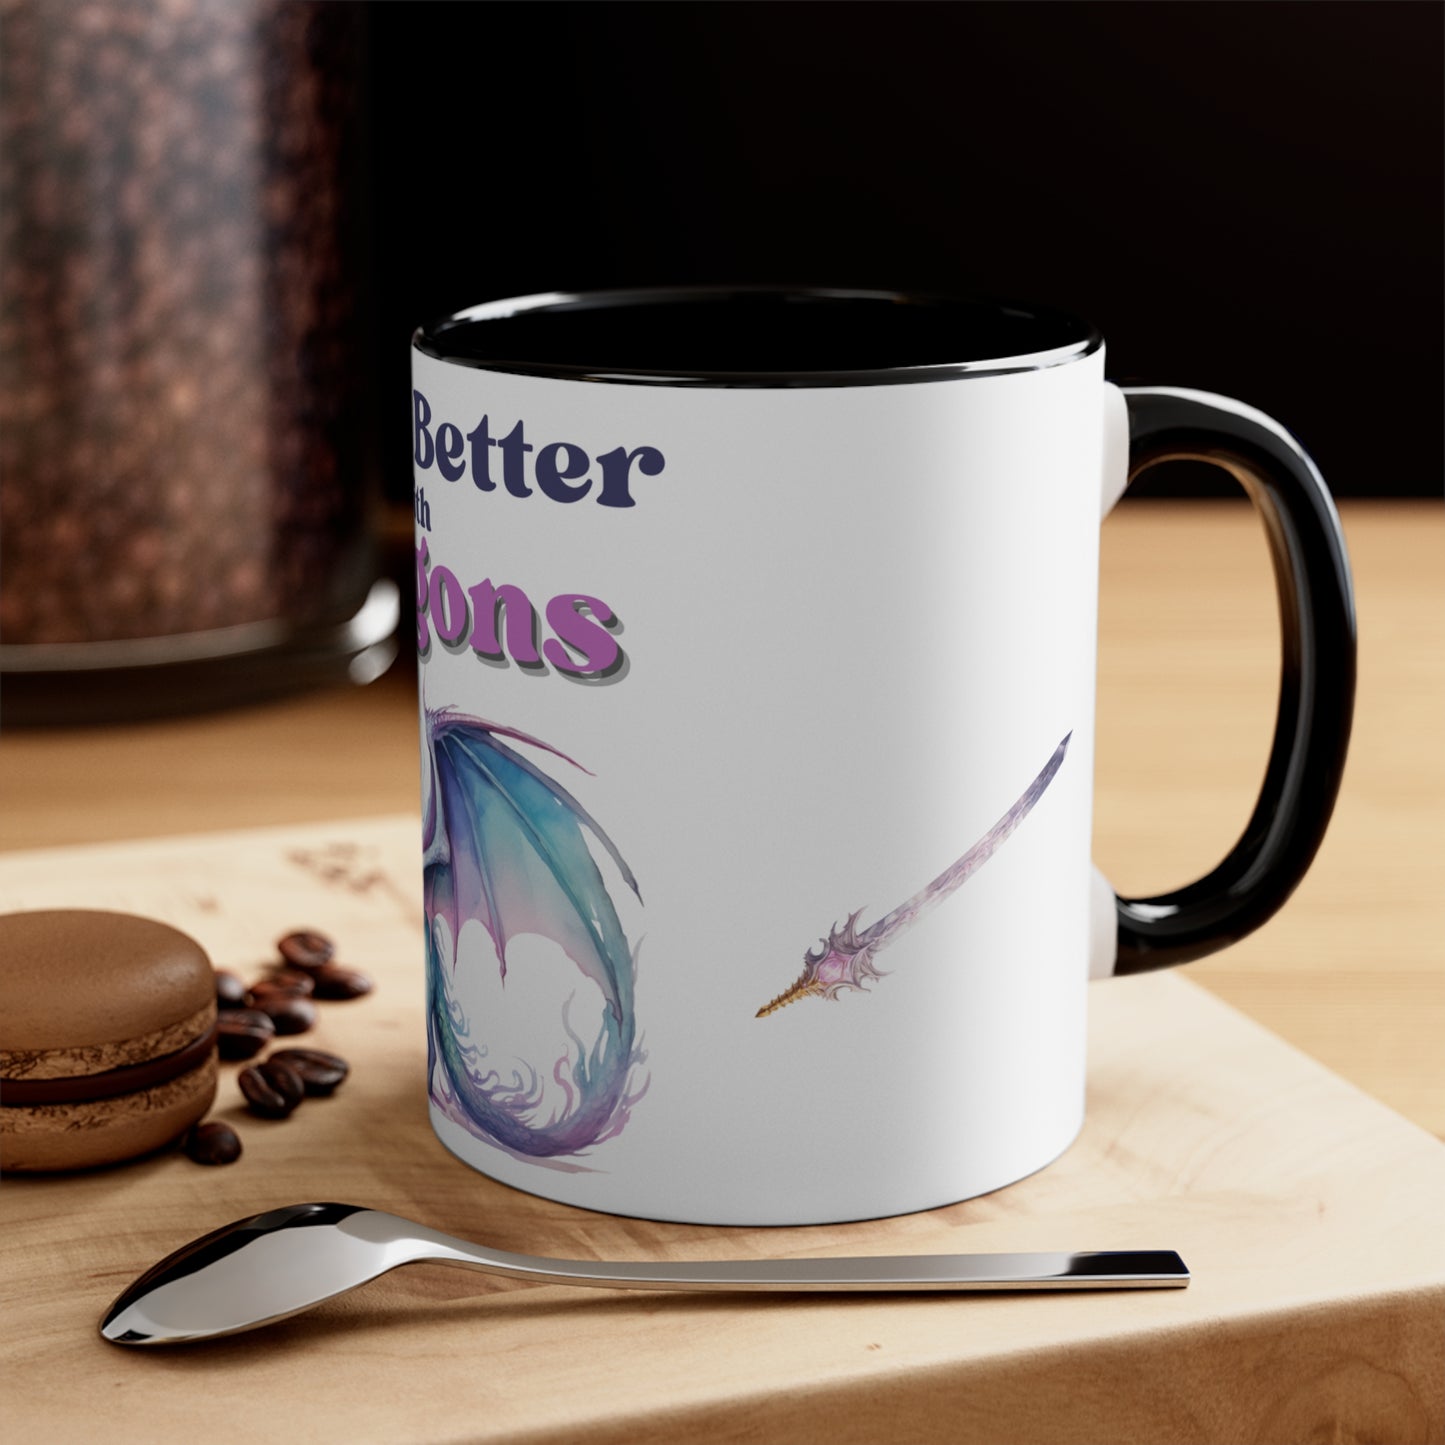 Life is Better with Dragons, Accent Coffee Mug, 11oz